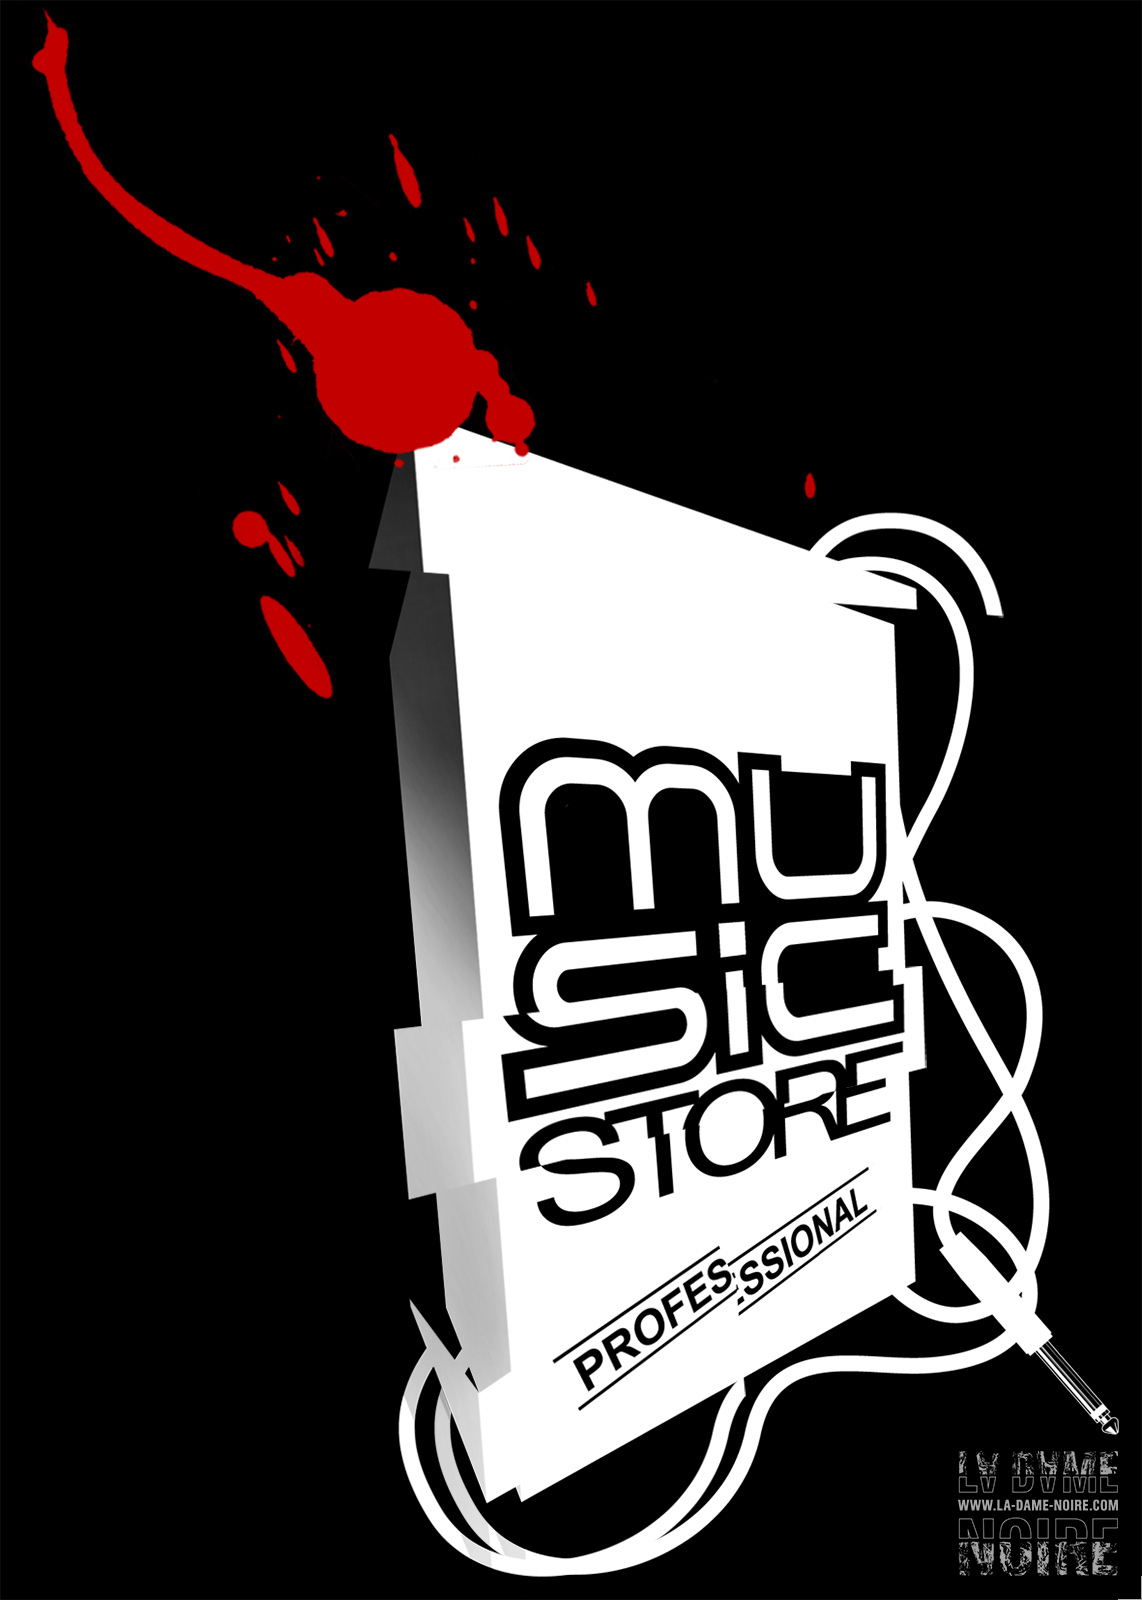 Re-make of Musicstore's logo for patch